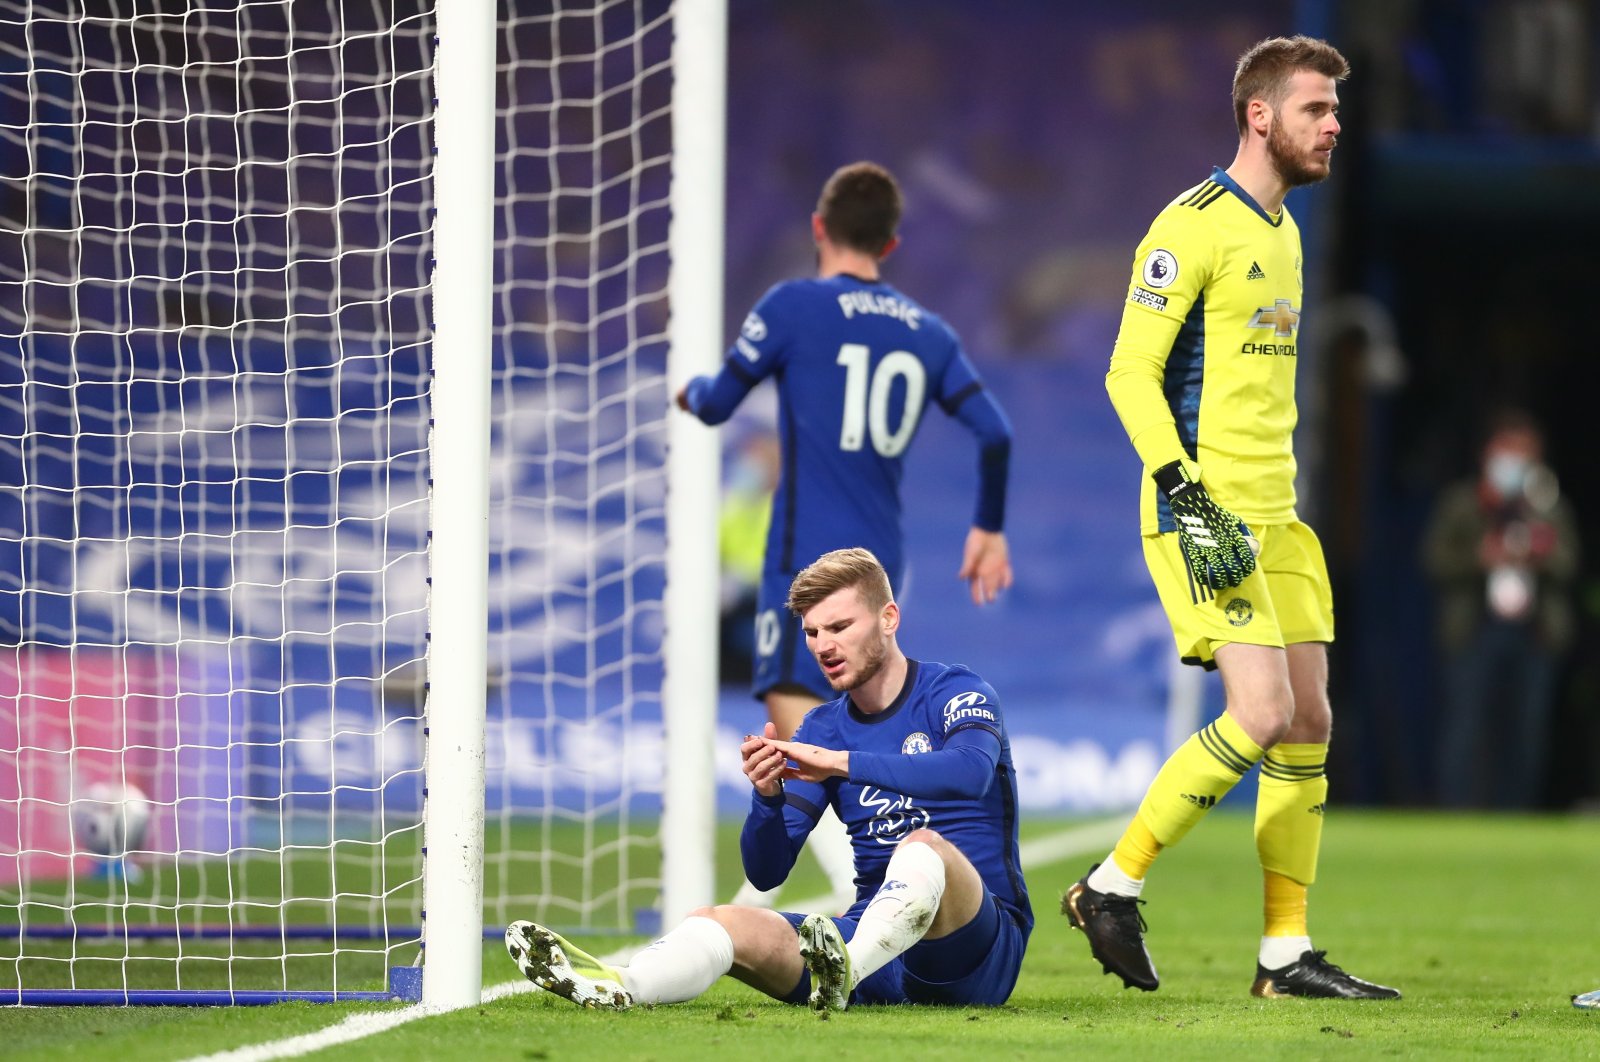 Chelsea's Timo Werner (down) reacts as Manchester United's goalkeeper David de Gea (R) walks away during the English Premier League match between Chelsea FC and Manchester United in London, U.K., Feb. 28, 2021. (EPA Photo)